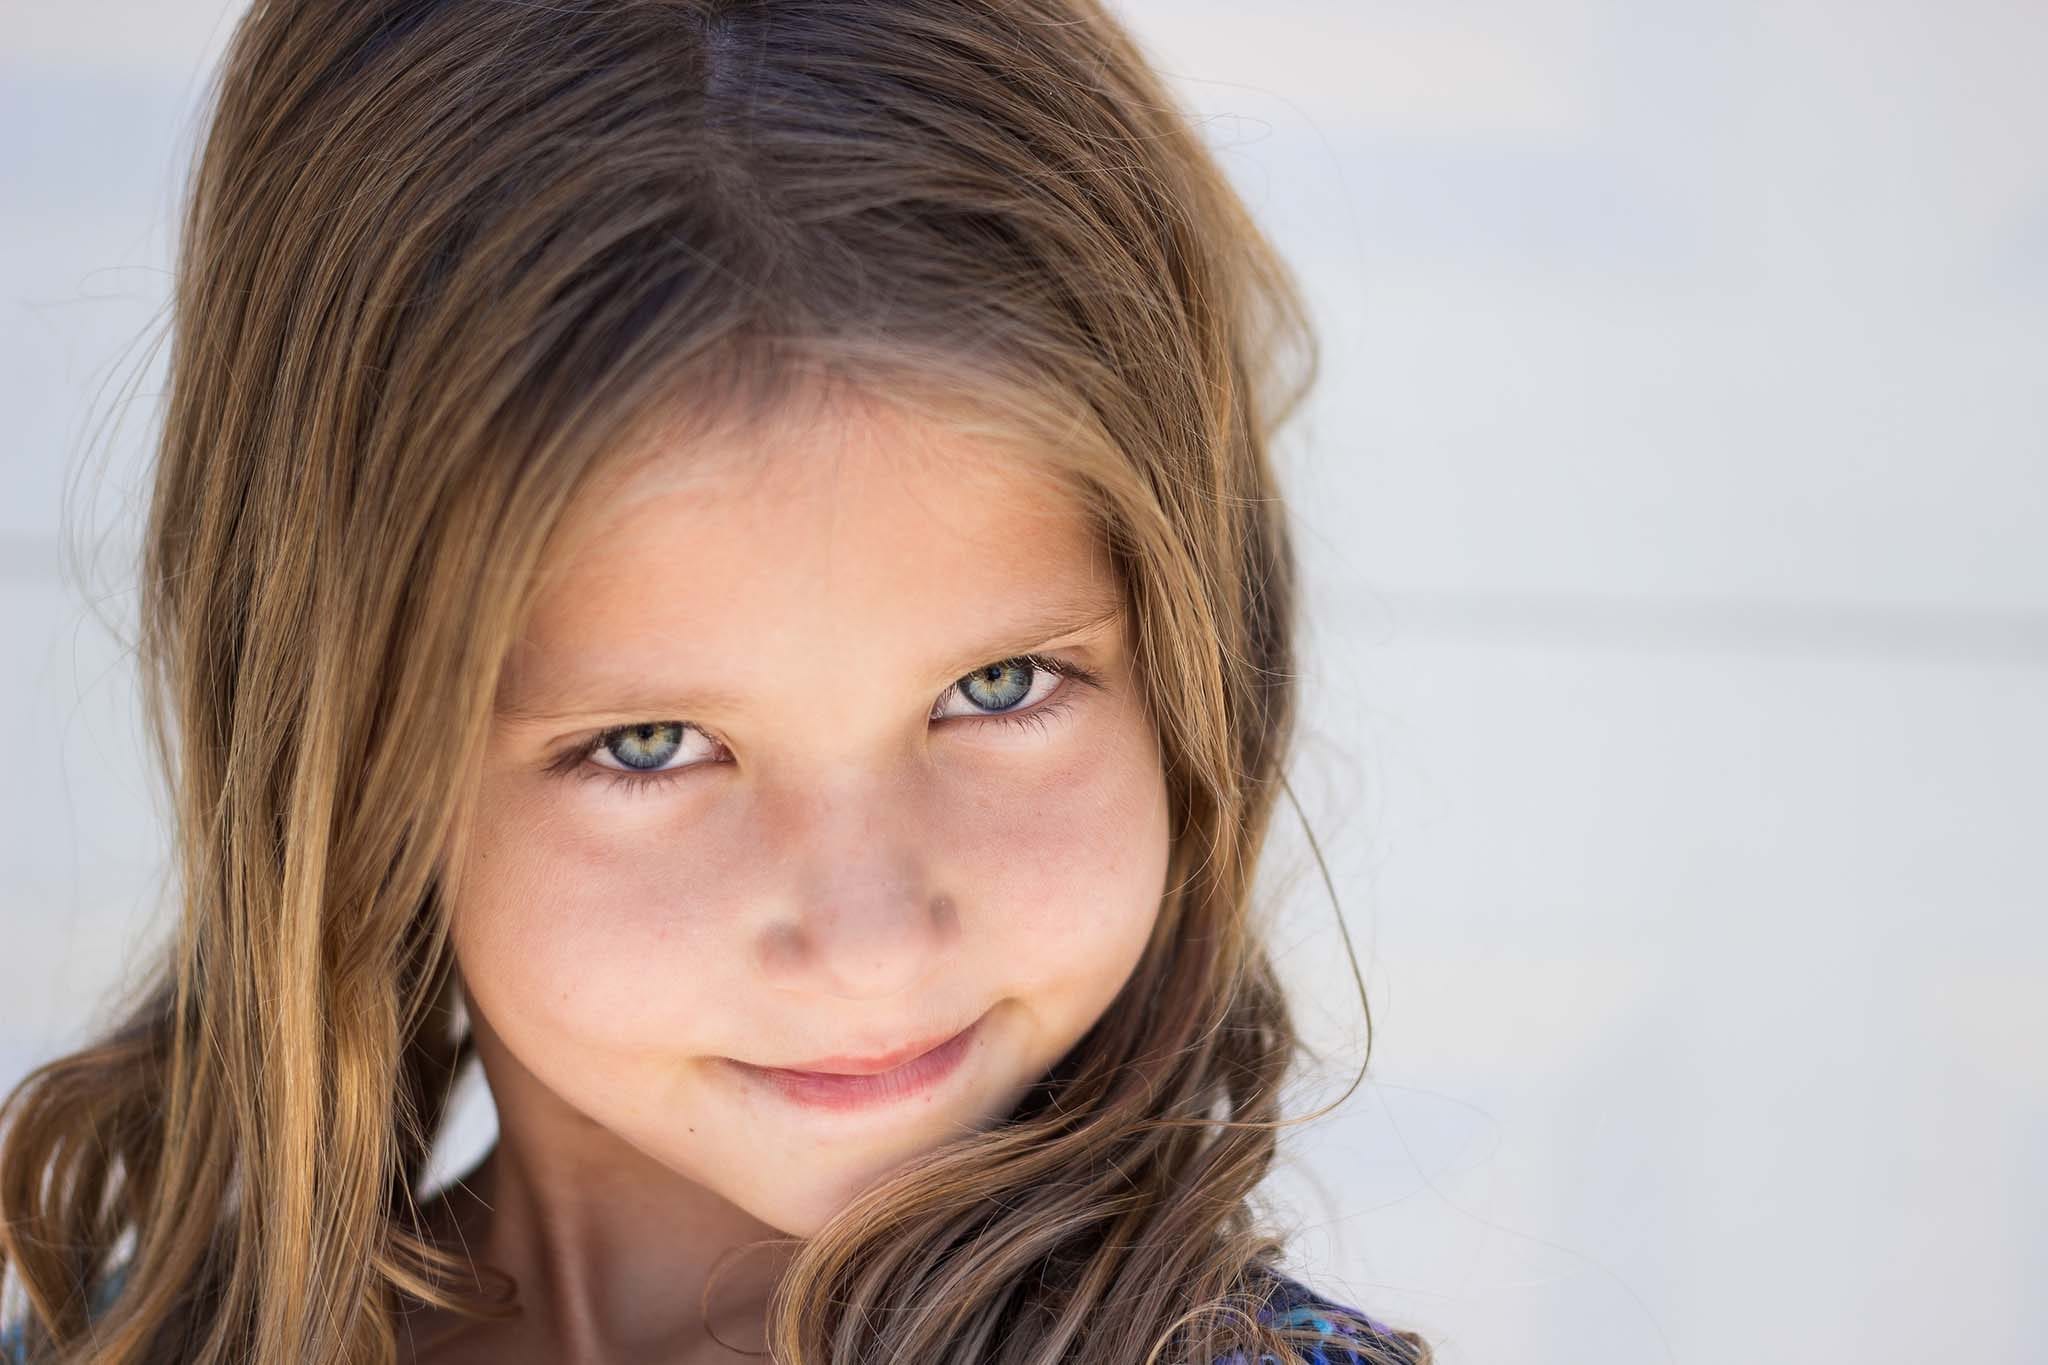 How To Capture Captivating Catchlights in Your Portrait Photography